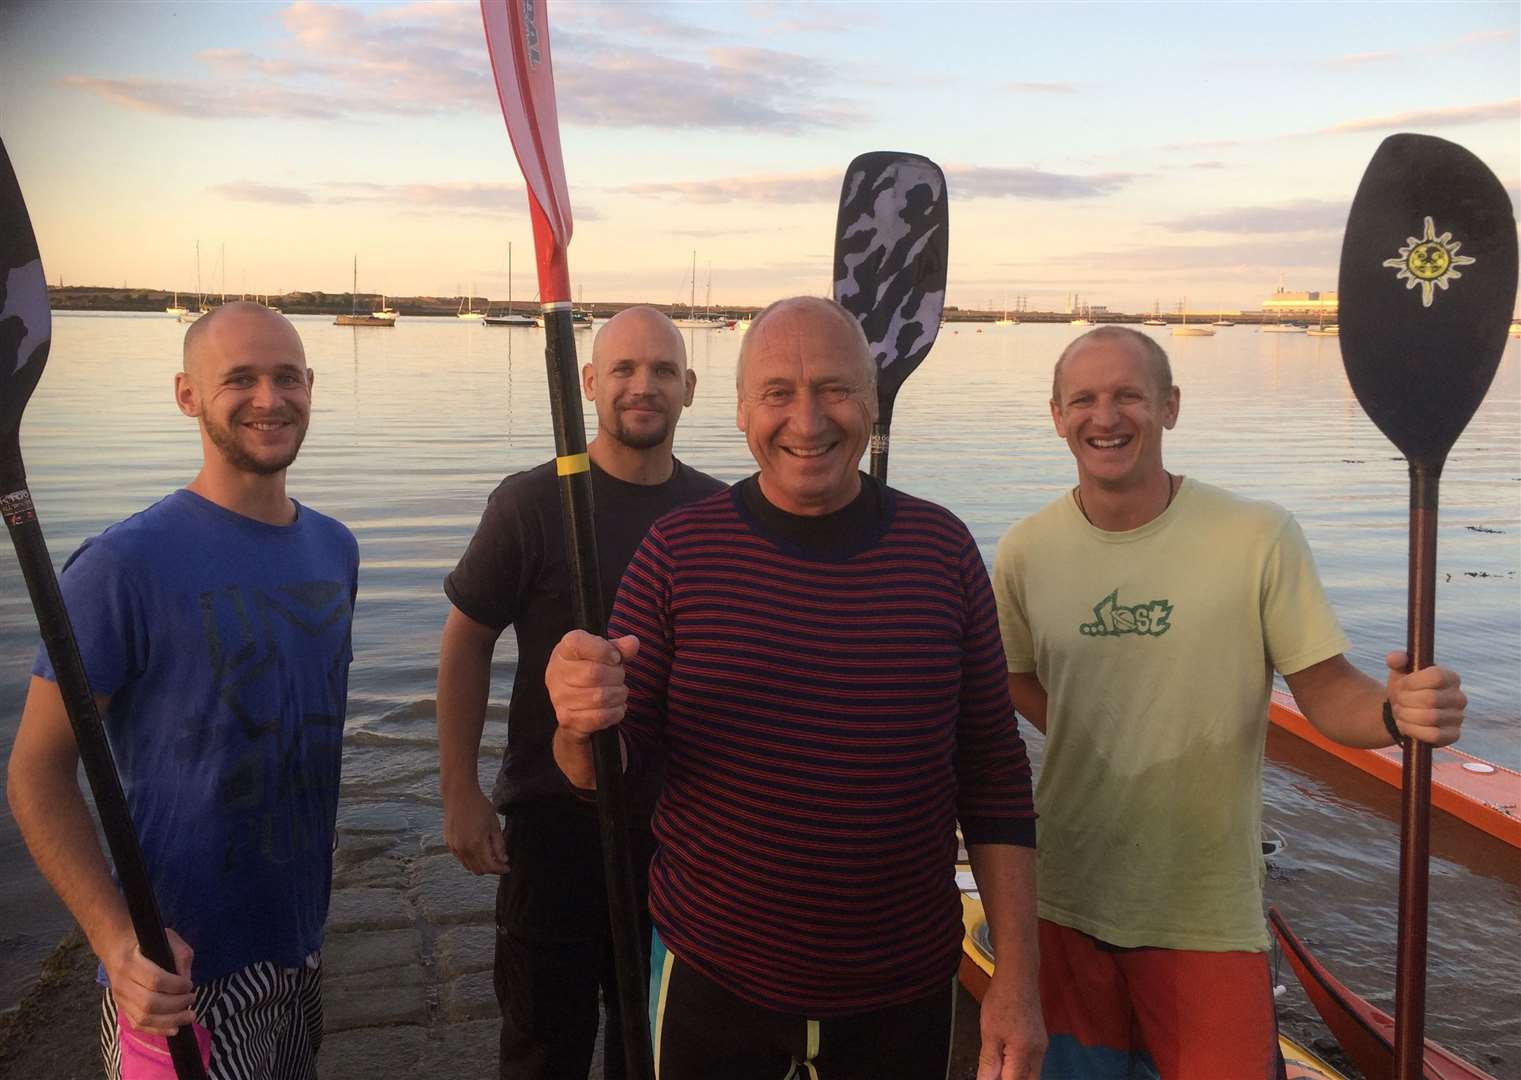 When Geoff replicated his first leg down the Medway in 2015 he was joined by sons (left-right) Harry, Jonathan and Tim